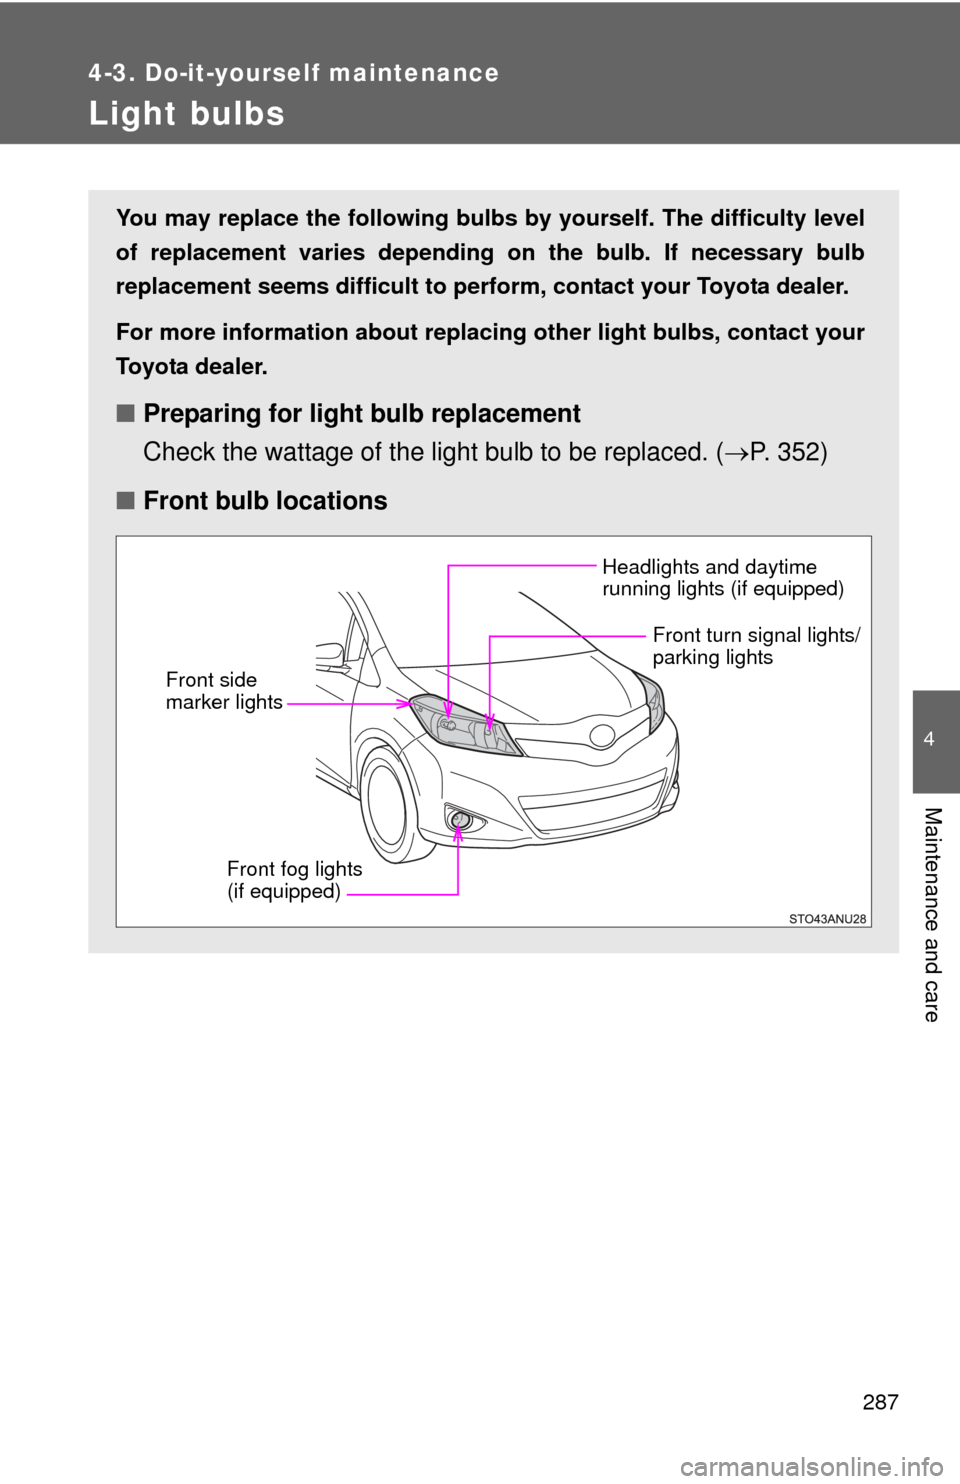 TOYOTA YARIS 2014 3.G Owners Manual 287
4-3. Do-it-yourself maintenance
4
Maintenance and care
Light bulbs
You may replace the following bulbs by yourself. The difficulty level
of replacement varies depending on the bulb. If necessary b